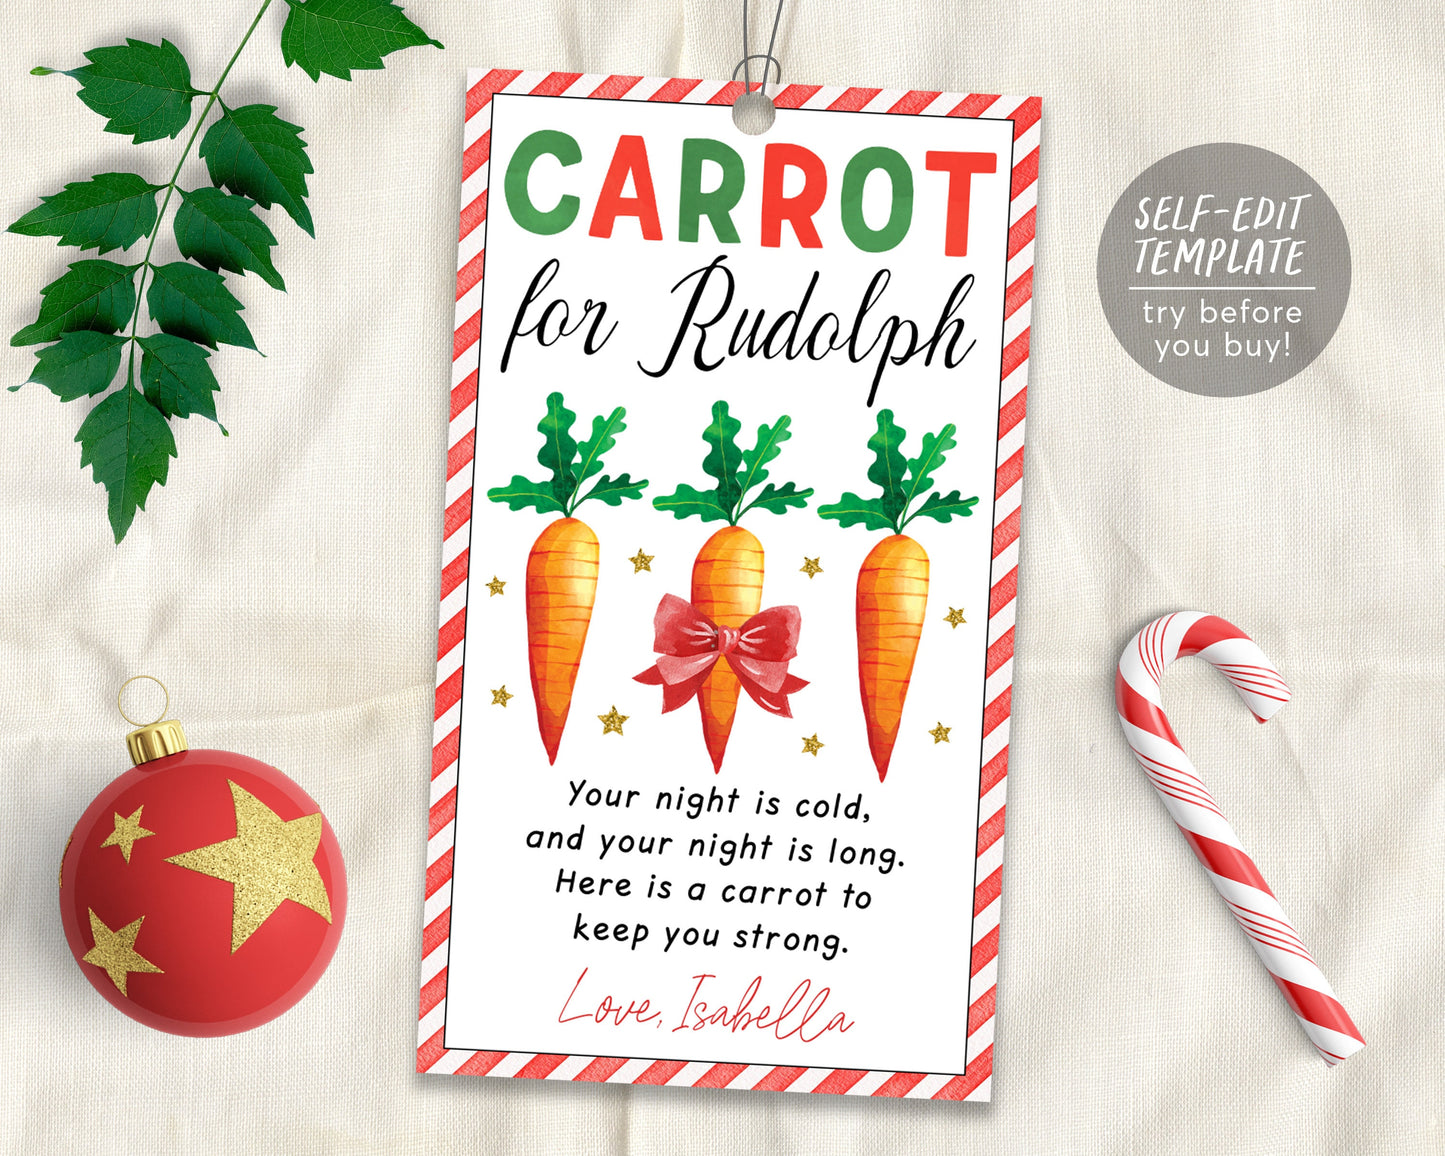 Carrot For Rudolph Tag Editable Template, Christmas Carrots For Reindeer Tag, Reindeer Food Treats Bag Topper, Christmas Eve Traditions Box